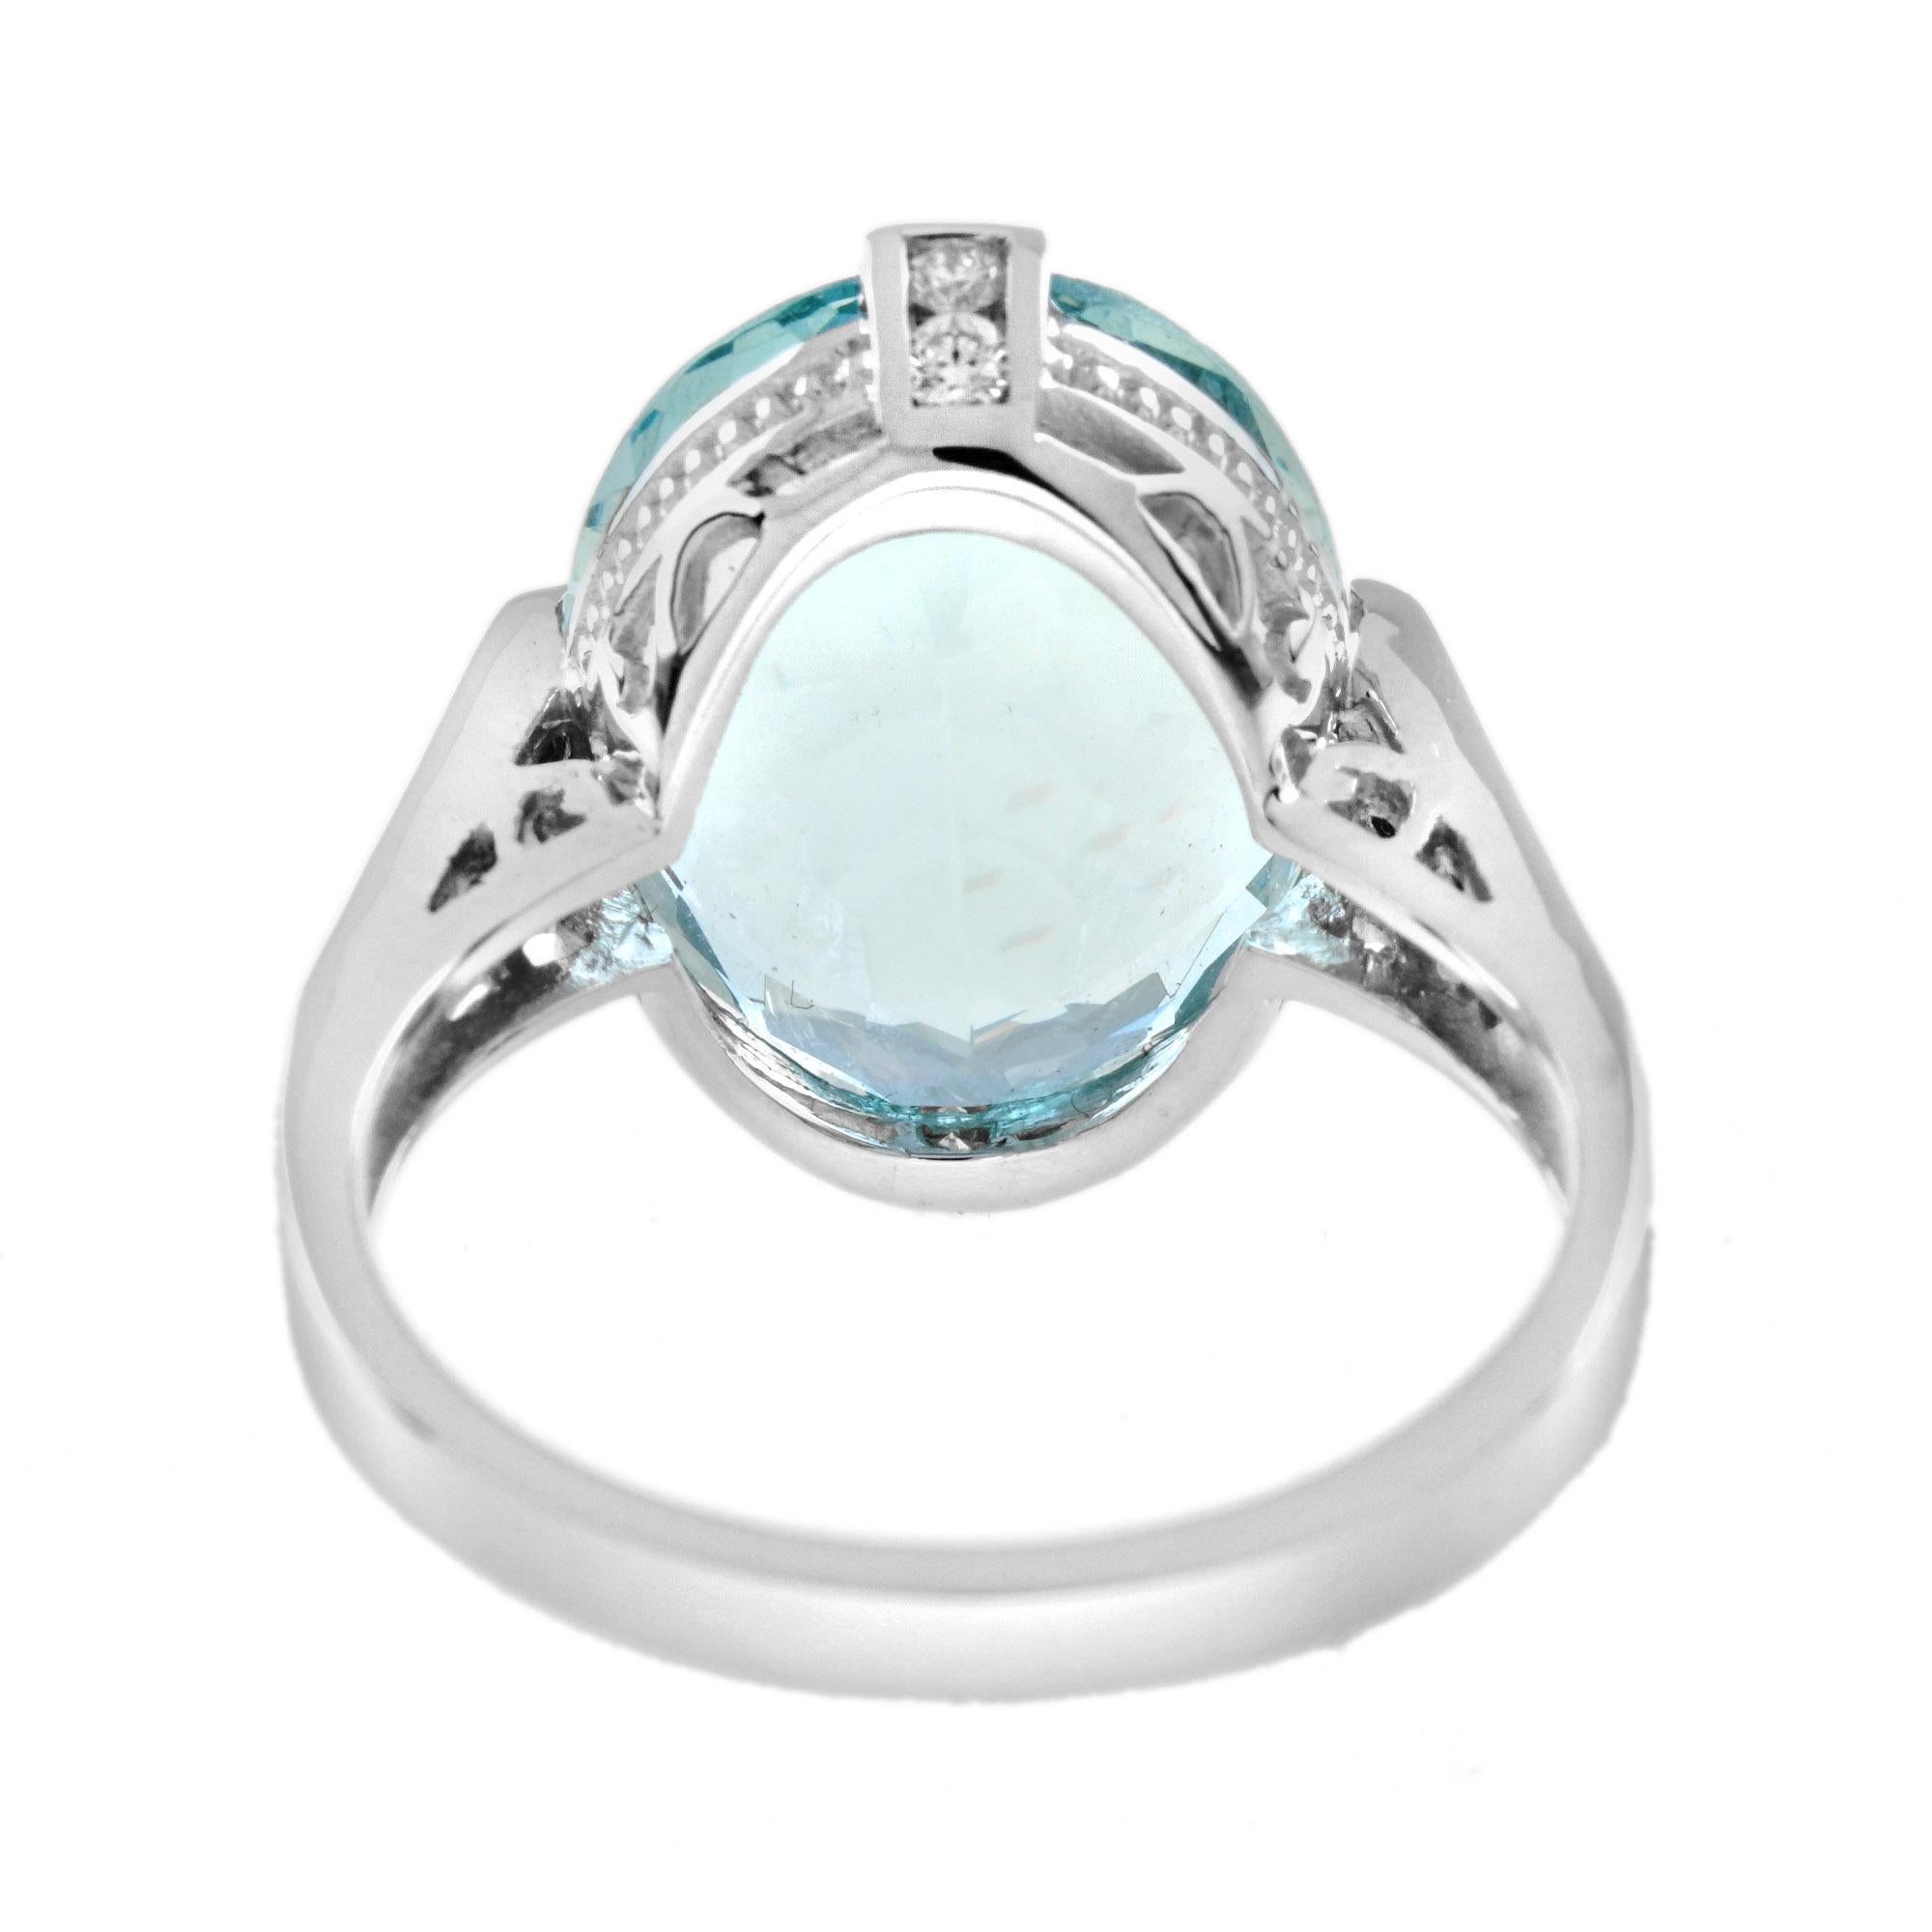 Women's 6.34 Ct. Aquamarine and Ruby Antique Design Cocktail Ring in 14K White Gold For Sale